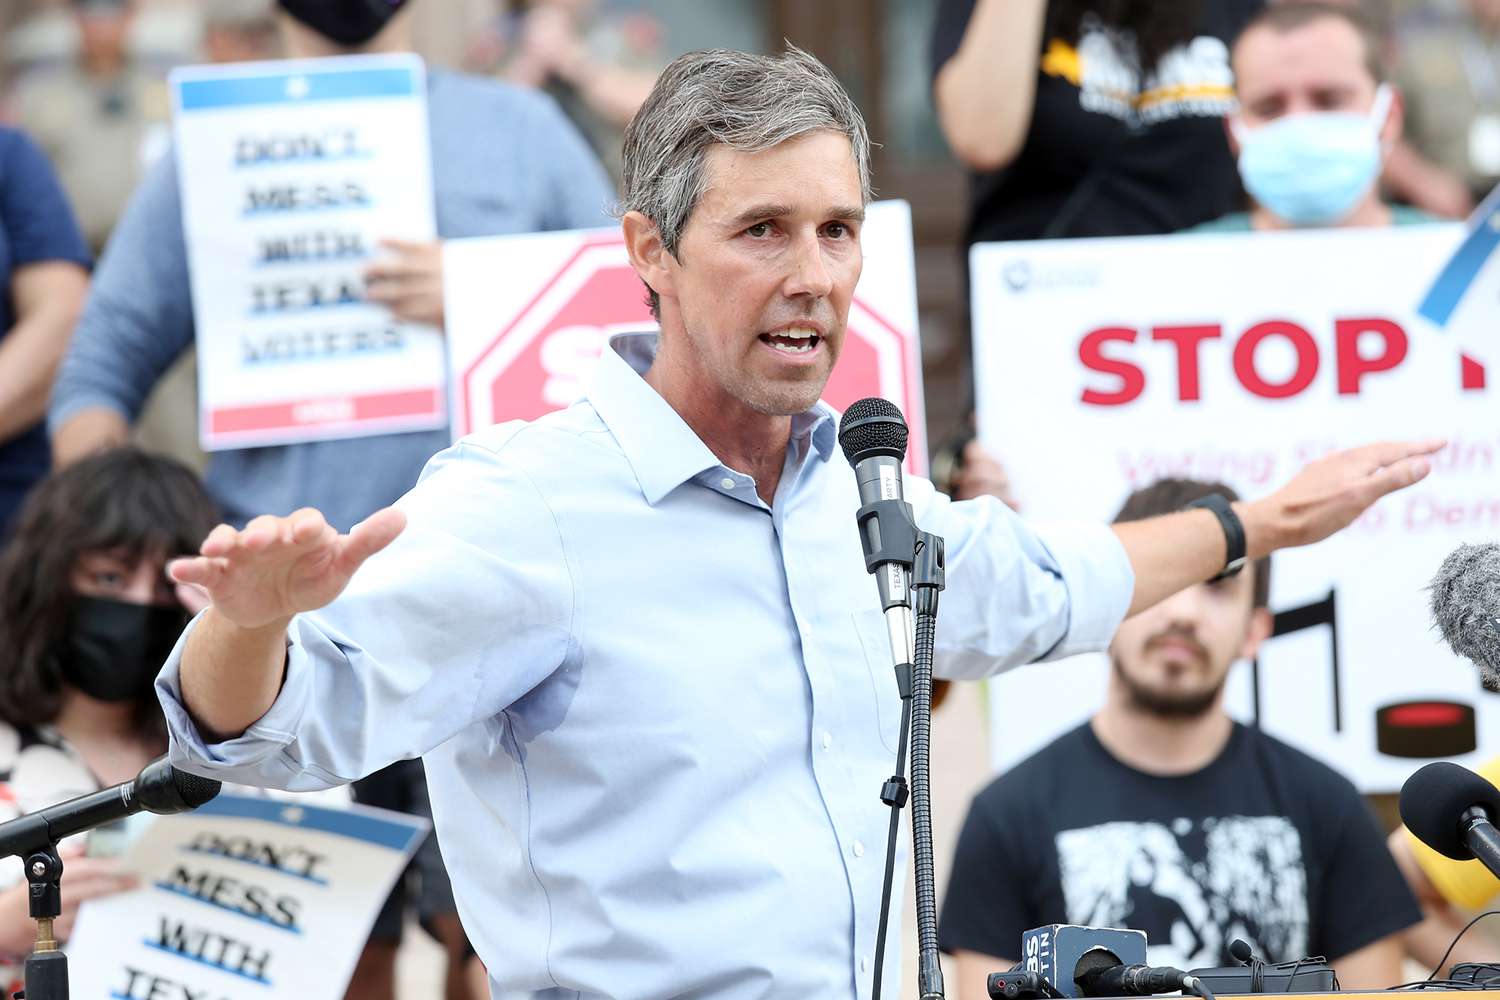 Former United States Representative Beto O'Rourke speaks during the &quot;Texans Rally For Our Voting Rights&quot; event at the Texas Capitol Building on May 8, 2021 in Austin, Texas